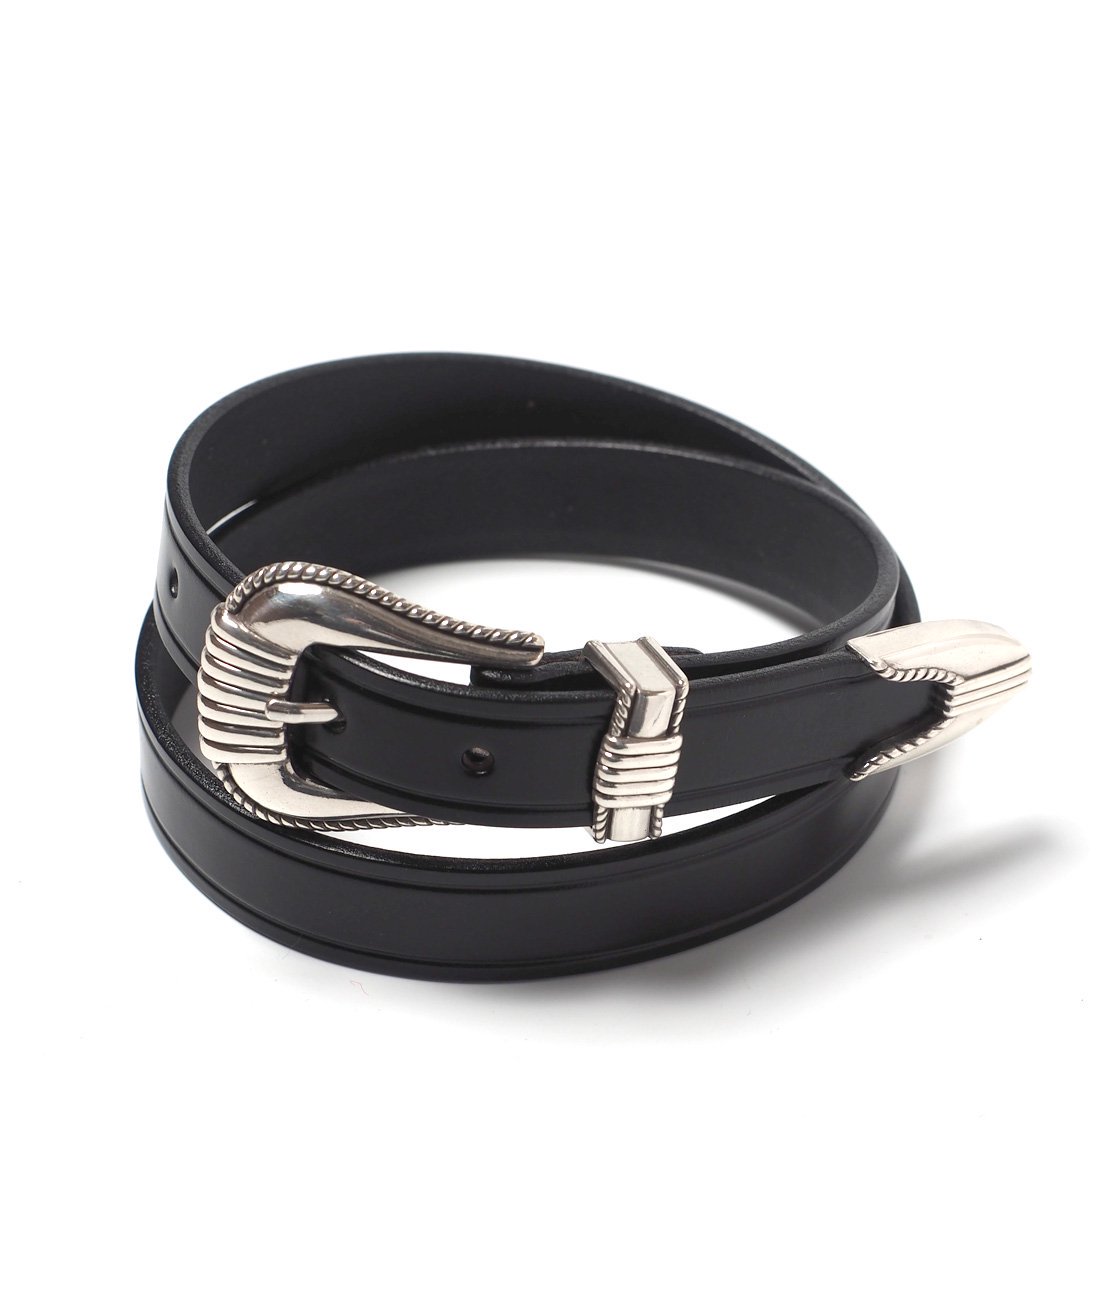 【TORY LEATHER】3PIECE CREASED SILVER BUCKLE BELT 